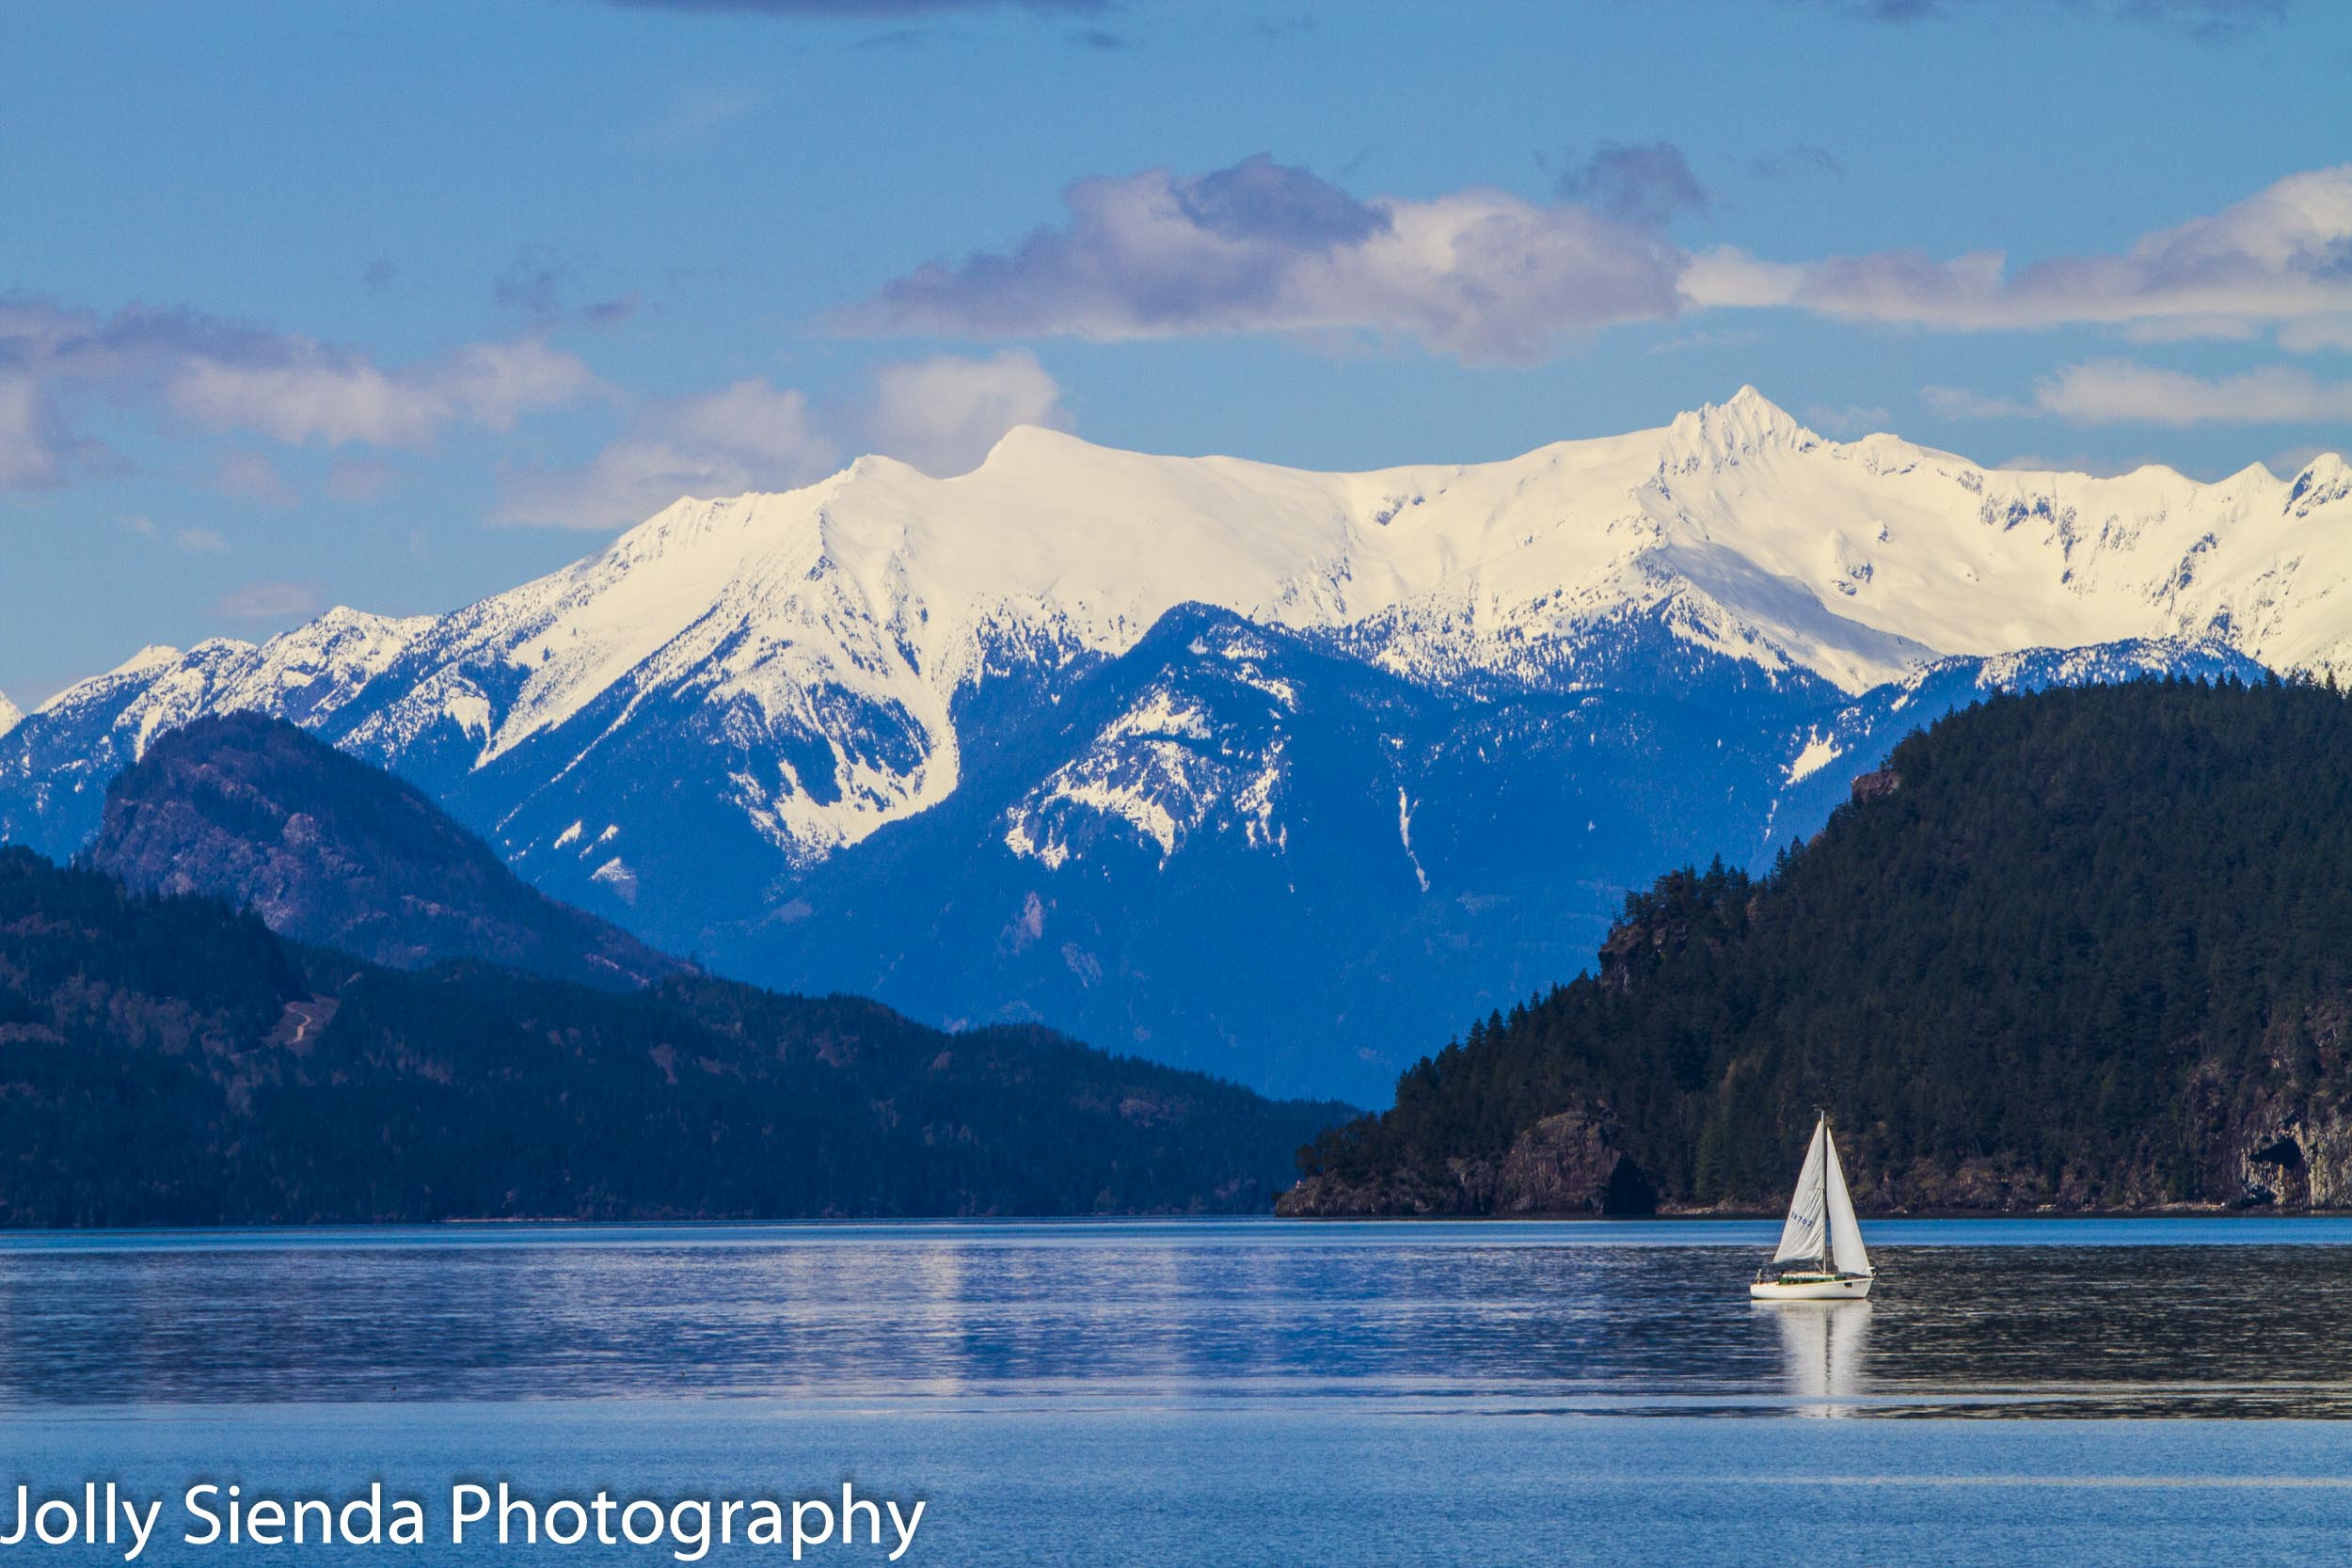 Sailboat on Harrison Lake and snow capped mountains